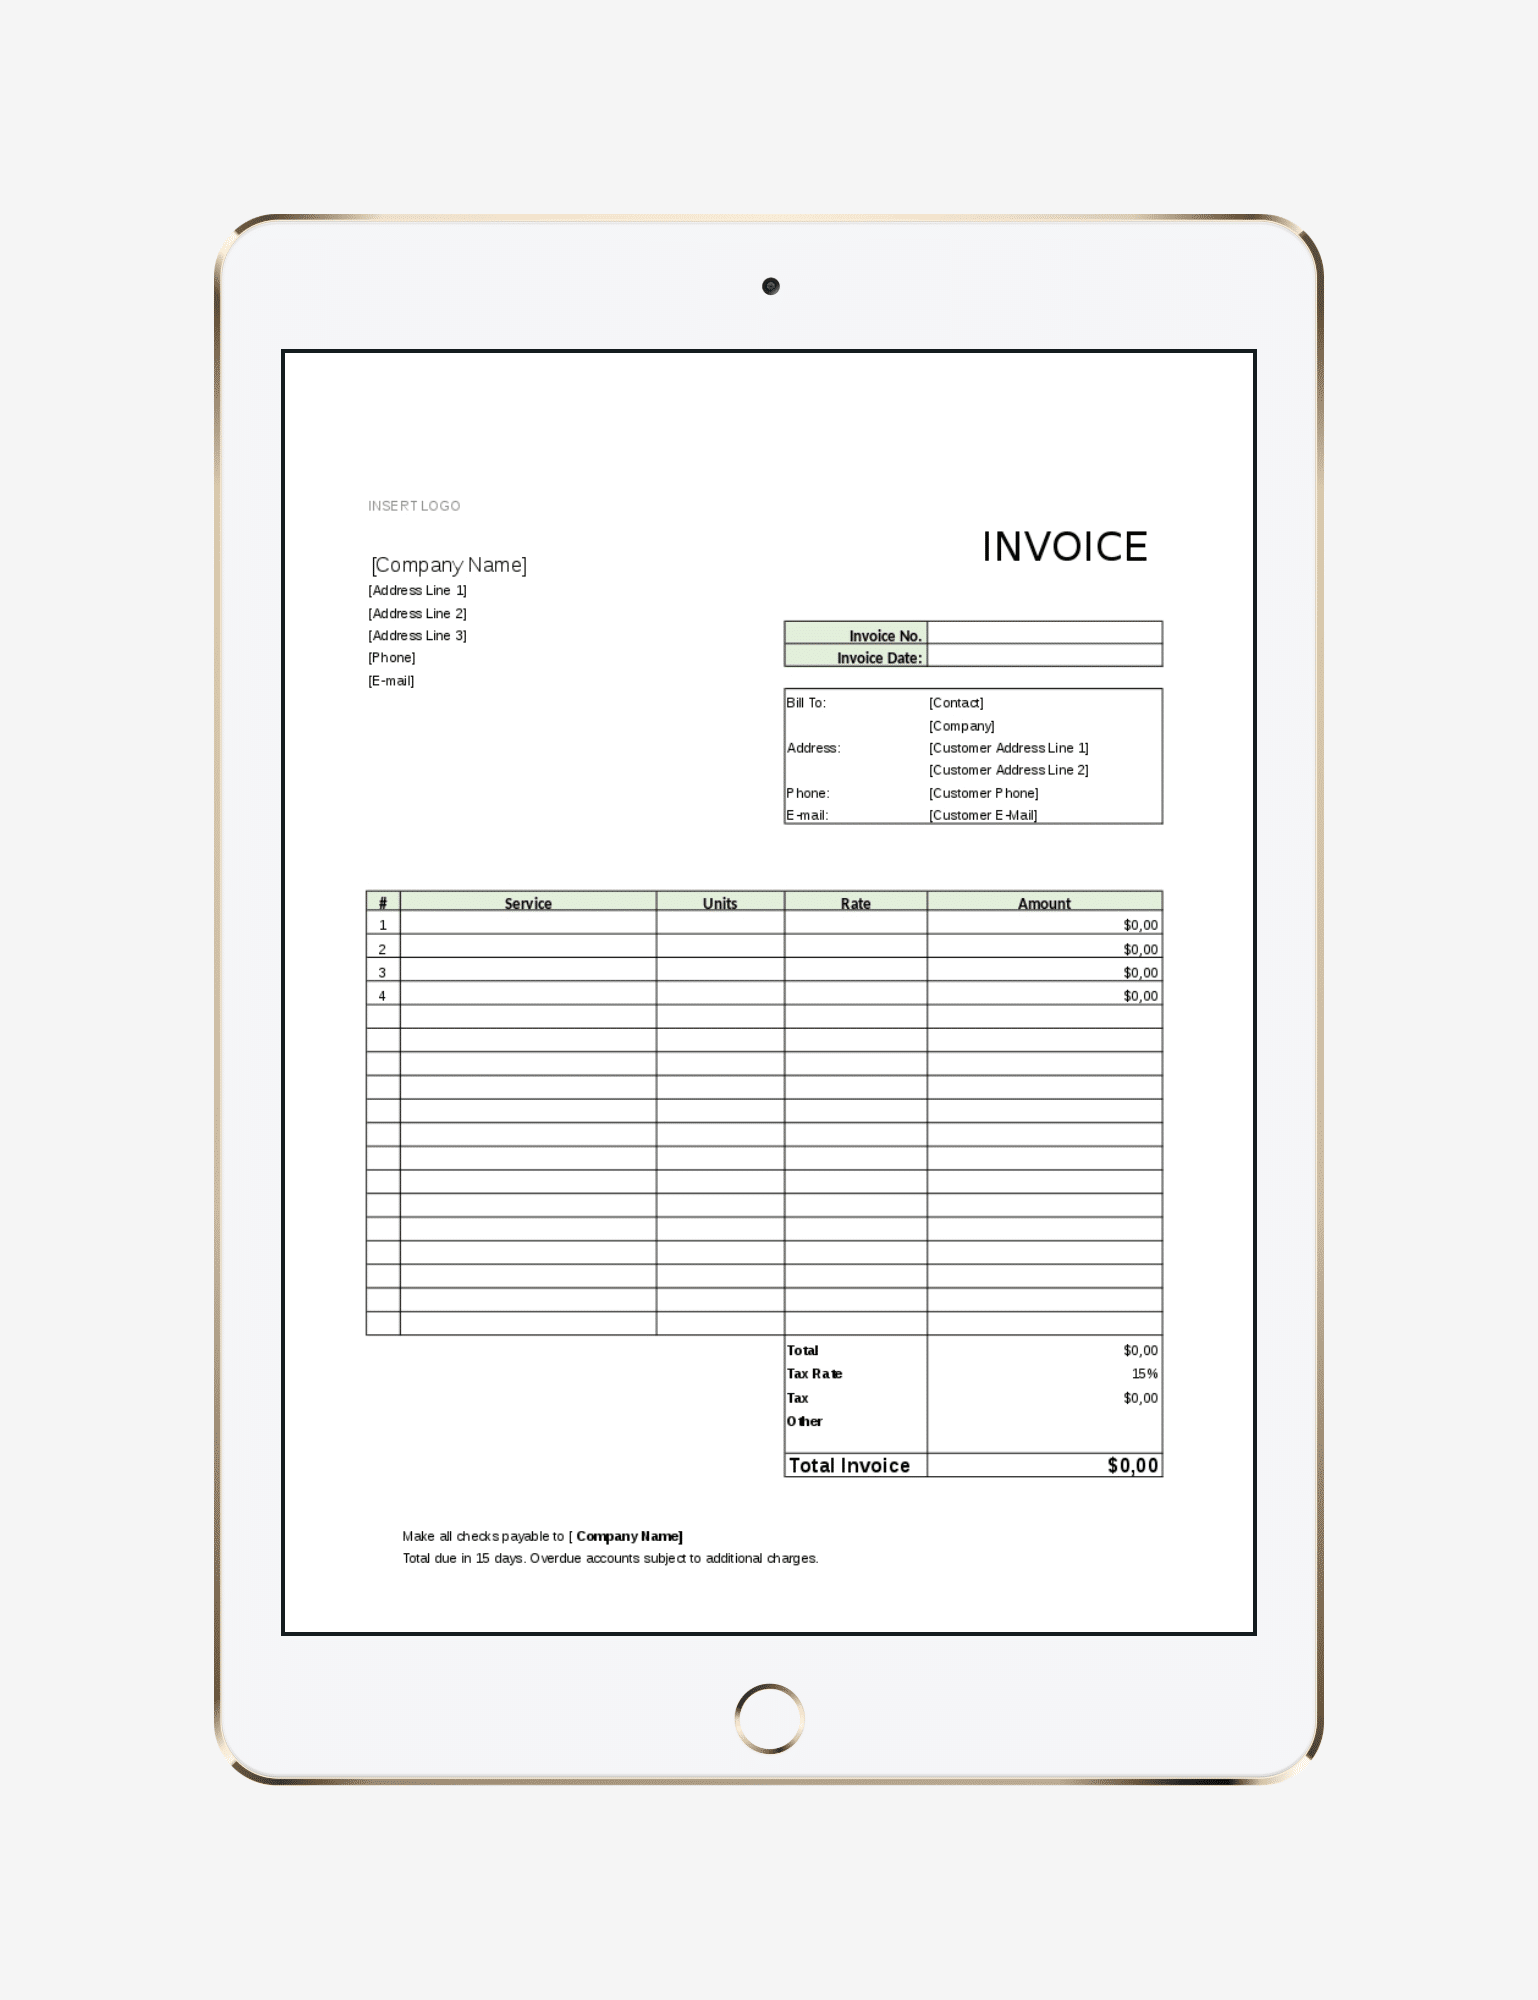 Invoice template - Project Manager Store Regarding Ipad Invoice Template